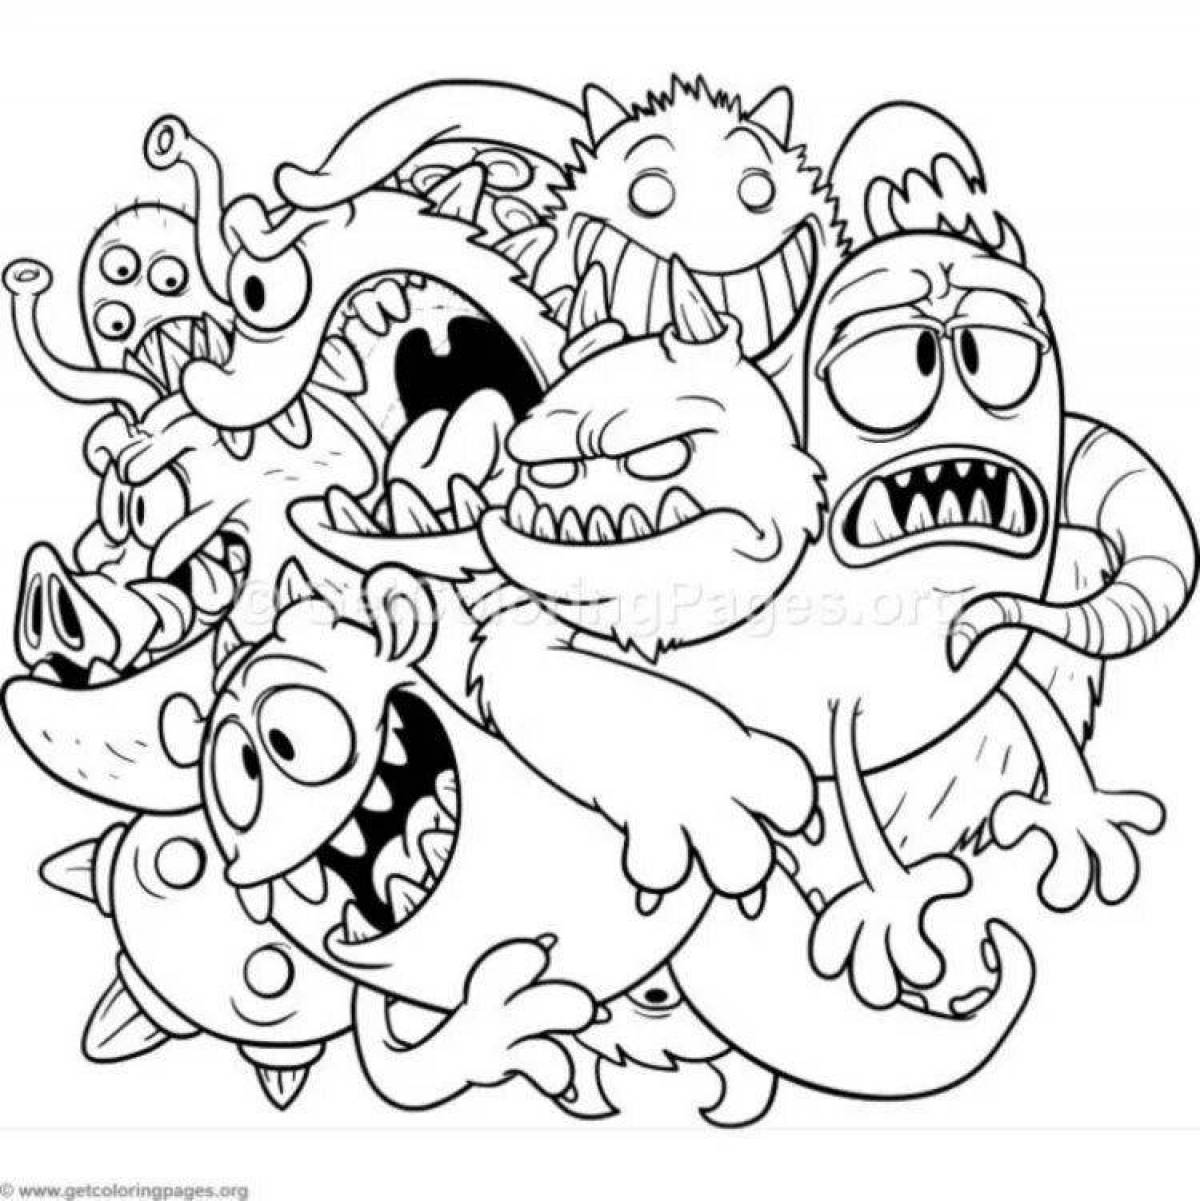 Great rainbow monsters coloring page